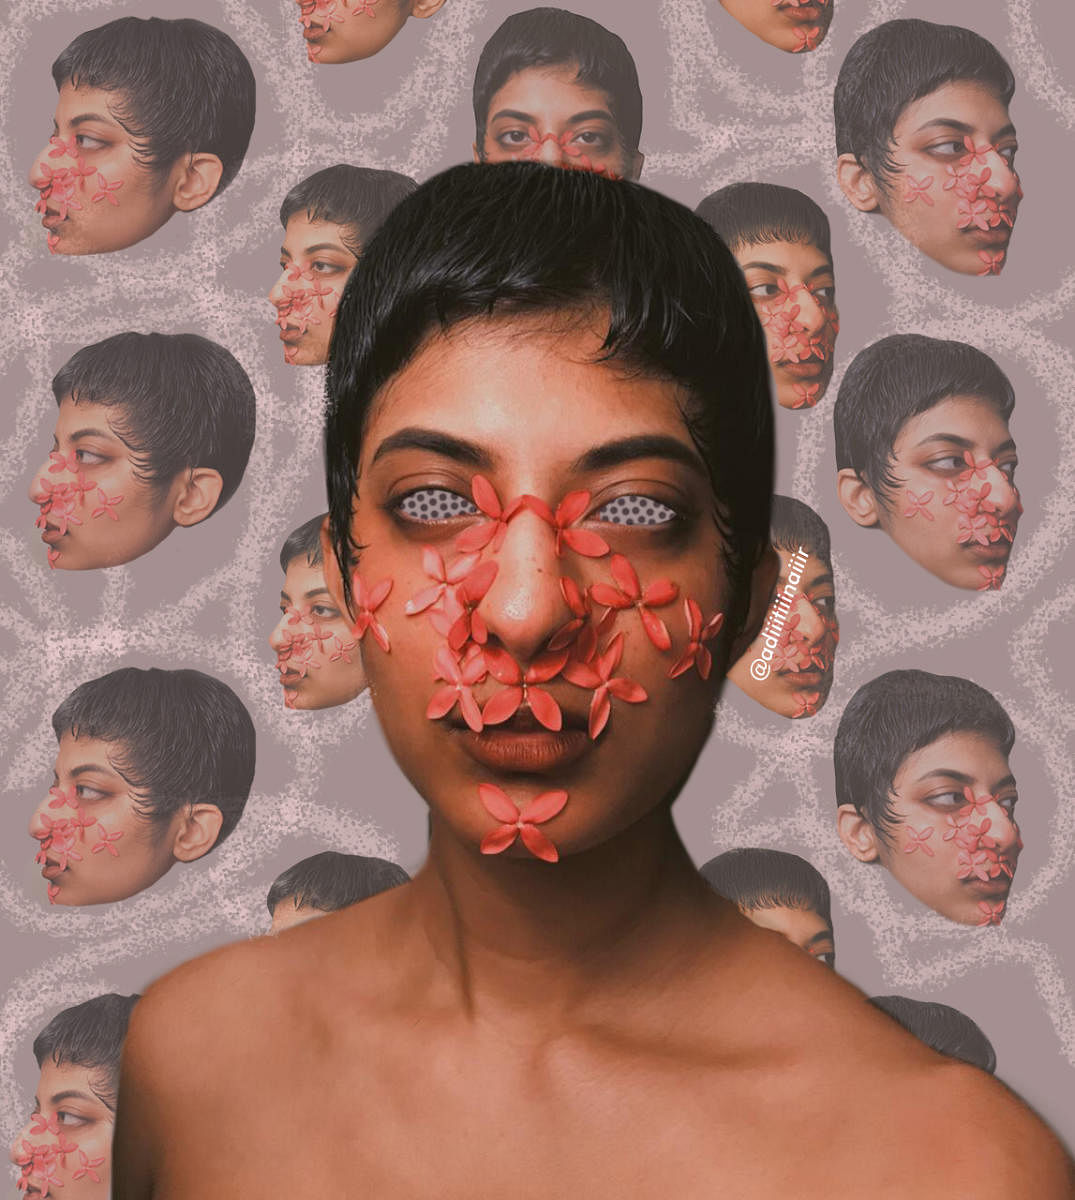 Fashion design student Aditi Nair uses photoshop to add more dimensions to her images.